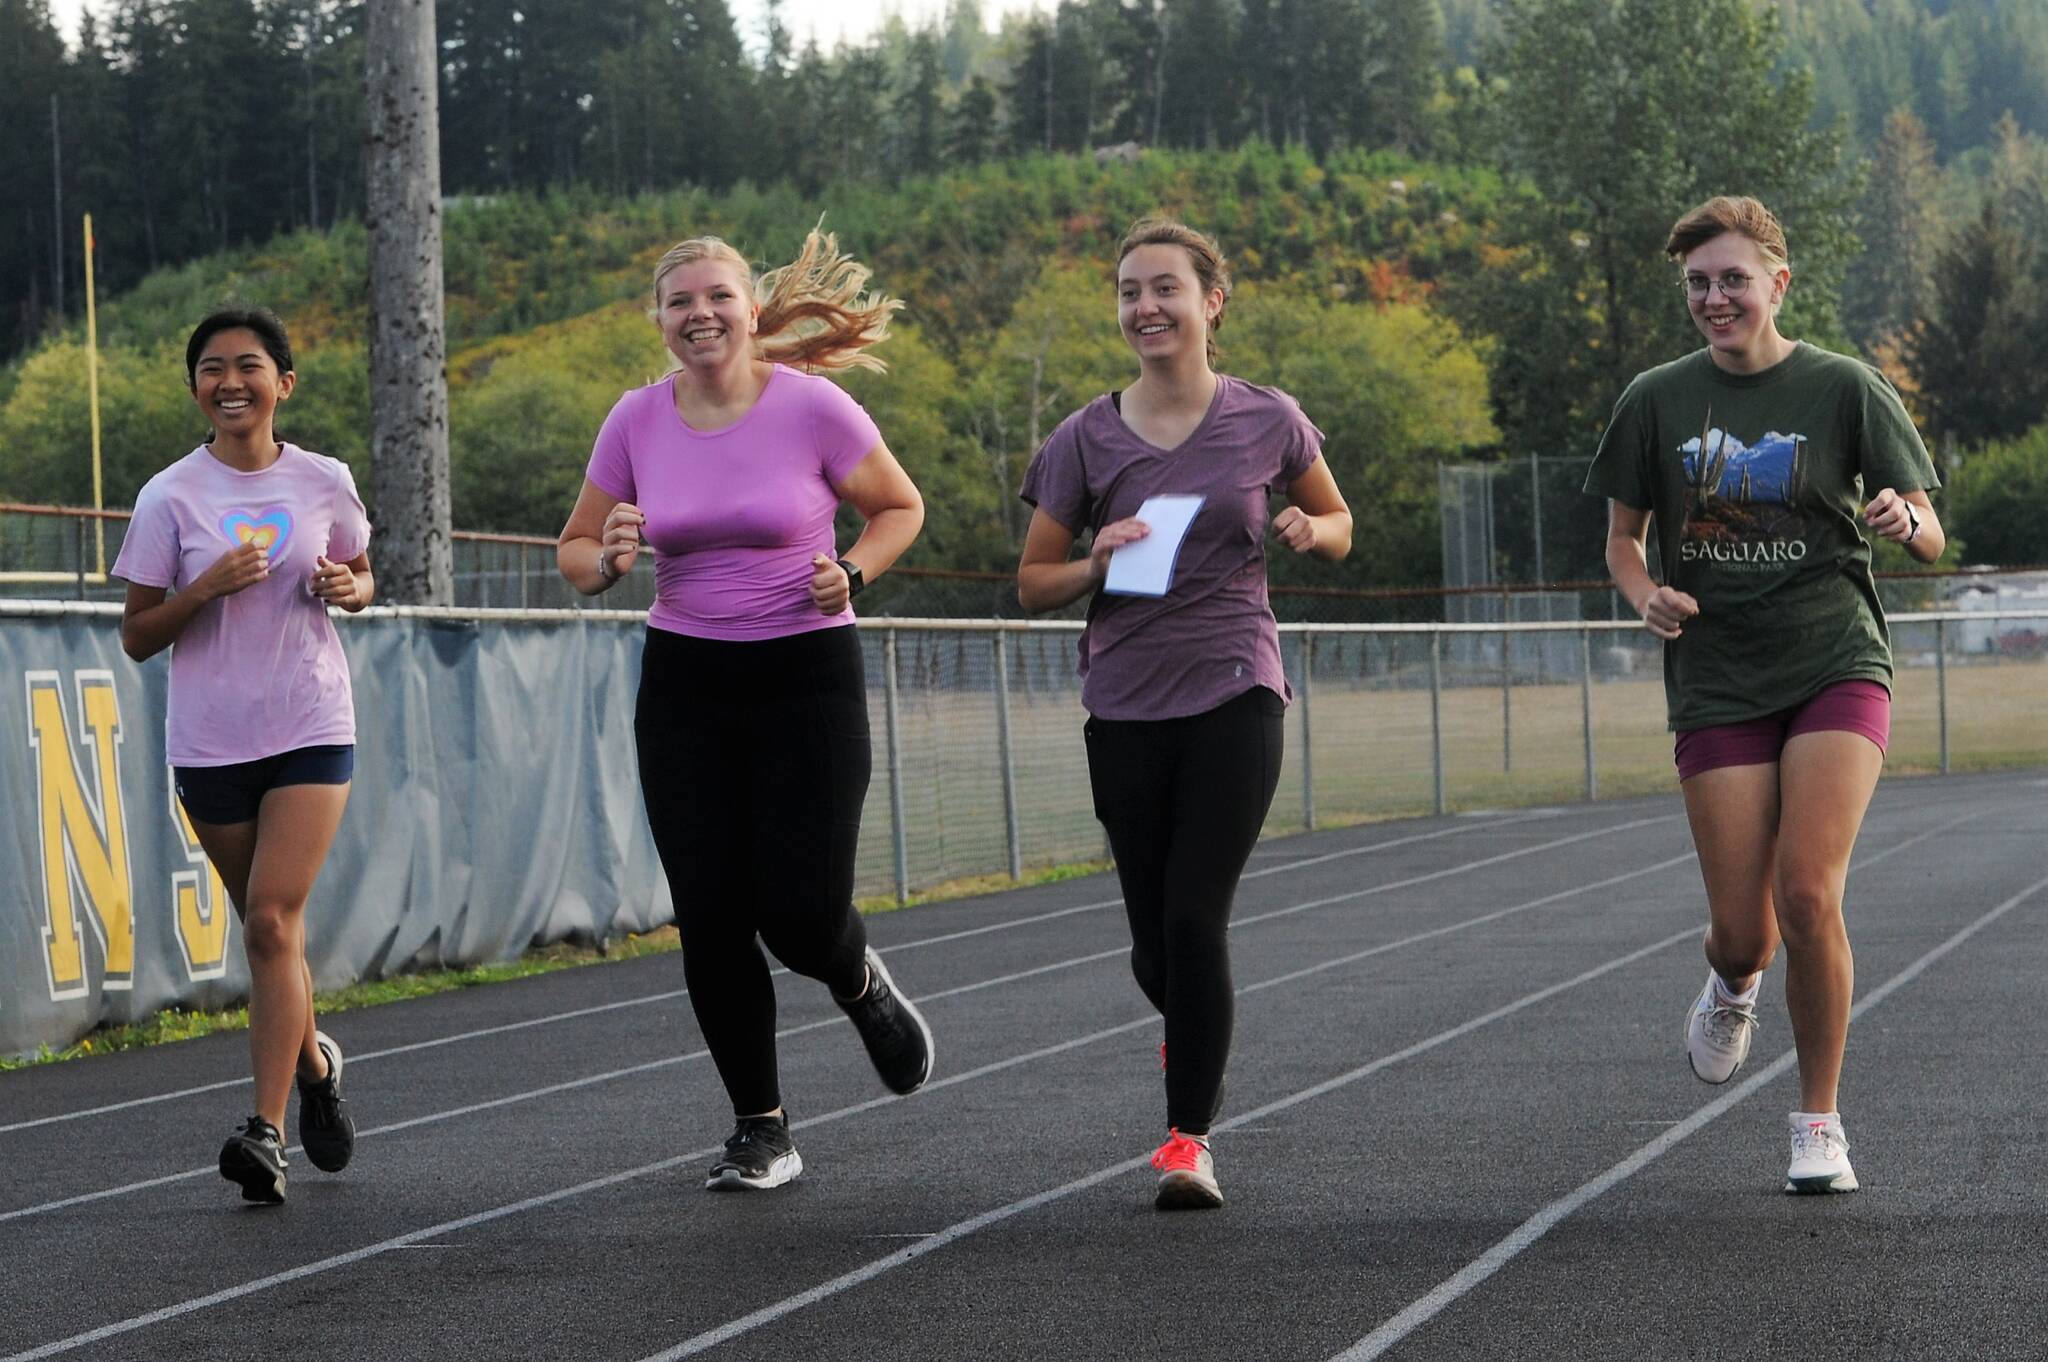 A few members of the Spartan cross country team took to the track at Spartan Stadium in preparation for the first meet scheduled at Ocosta on Saturday, Sept. 21 beginning at 10 a.m. Photo by Lonnie Archibald